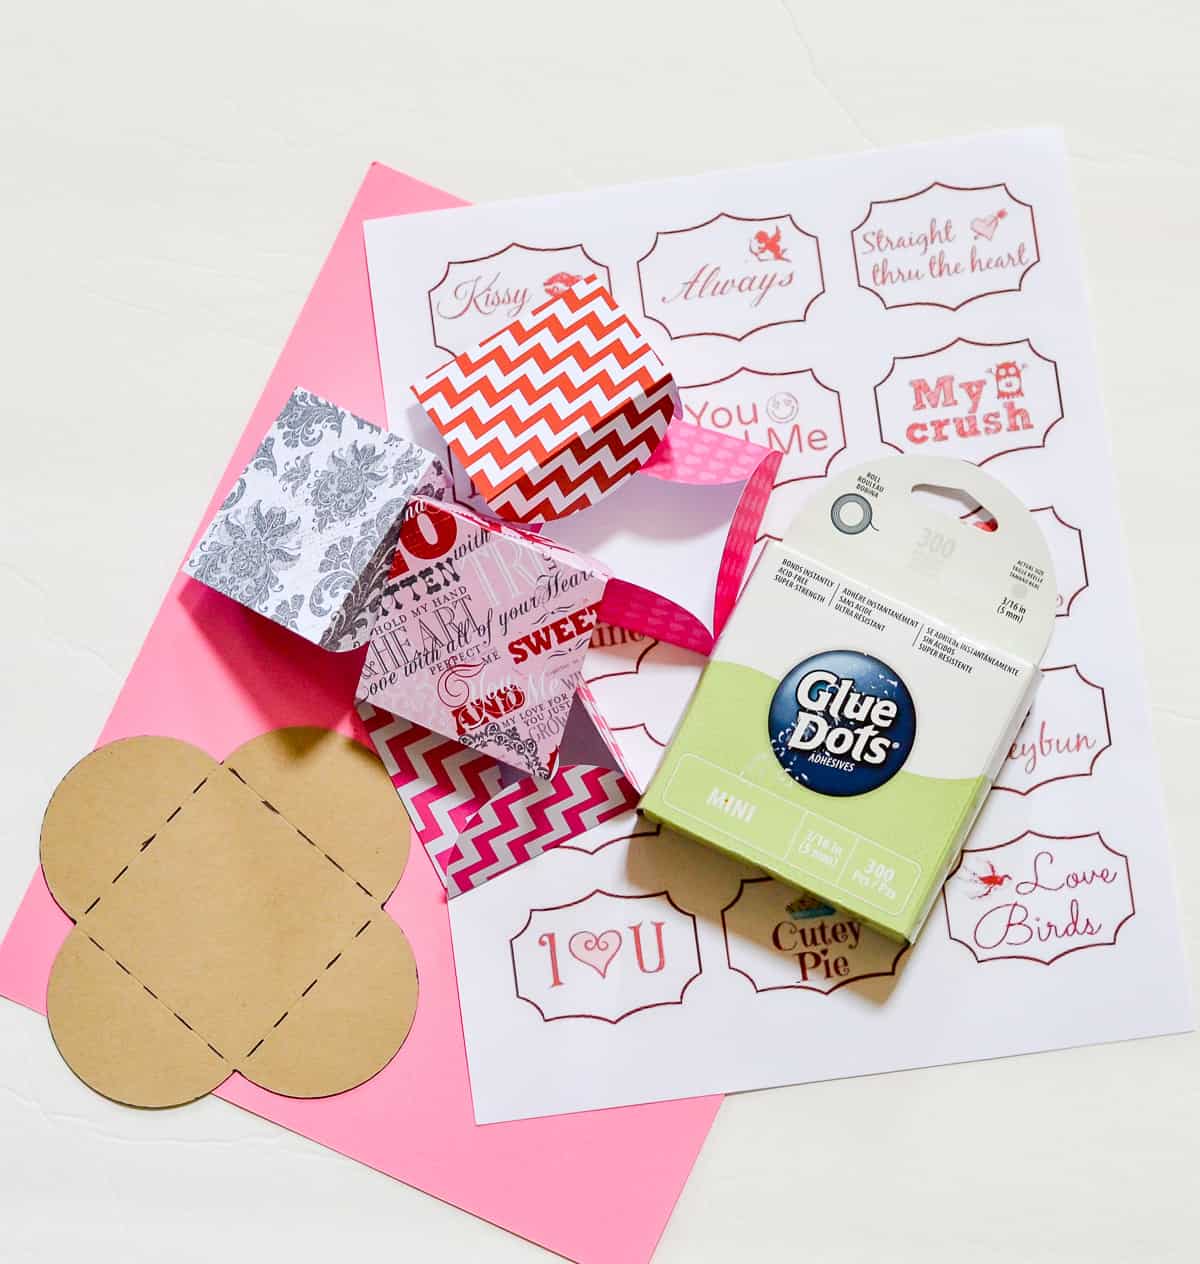 Supplies need to make mini Valentine's Day cards made with scrapbook paper